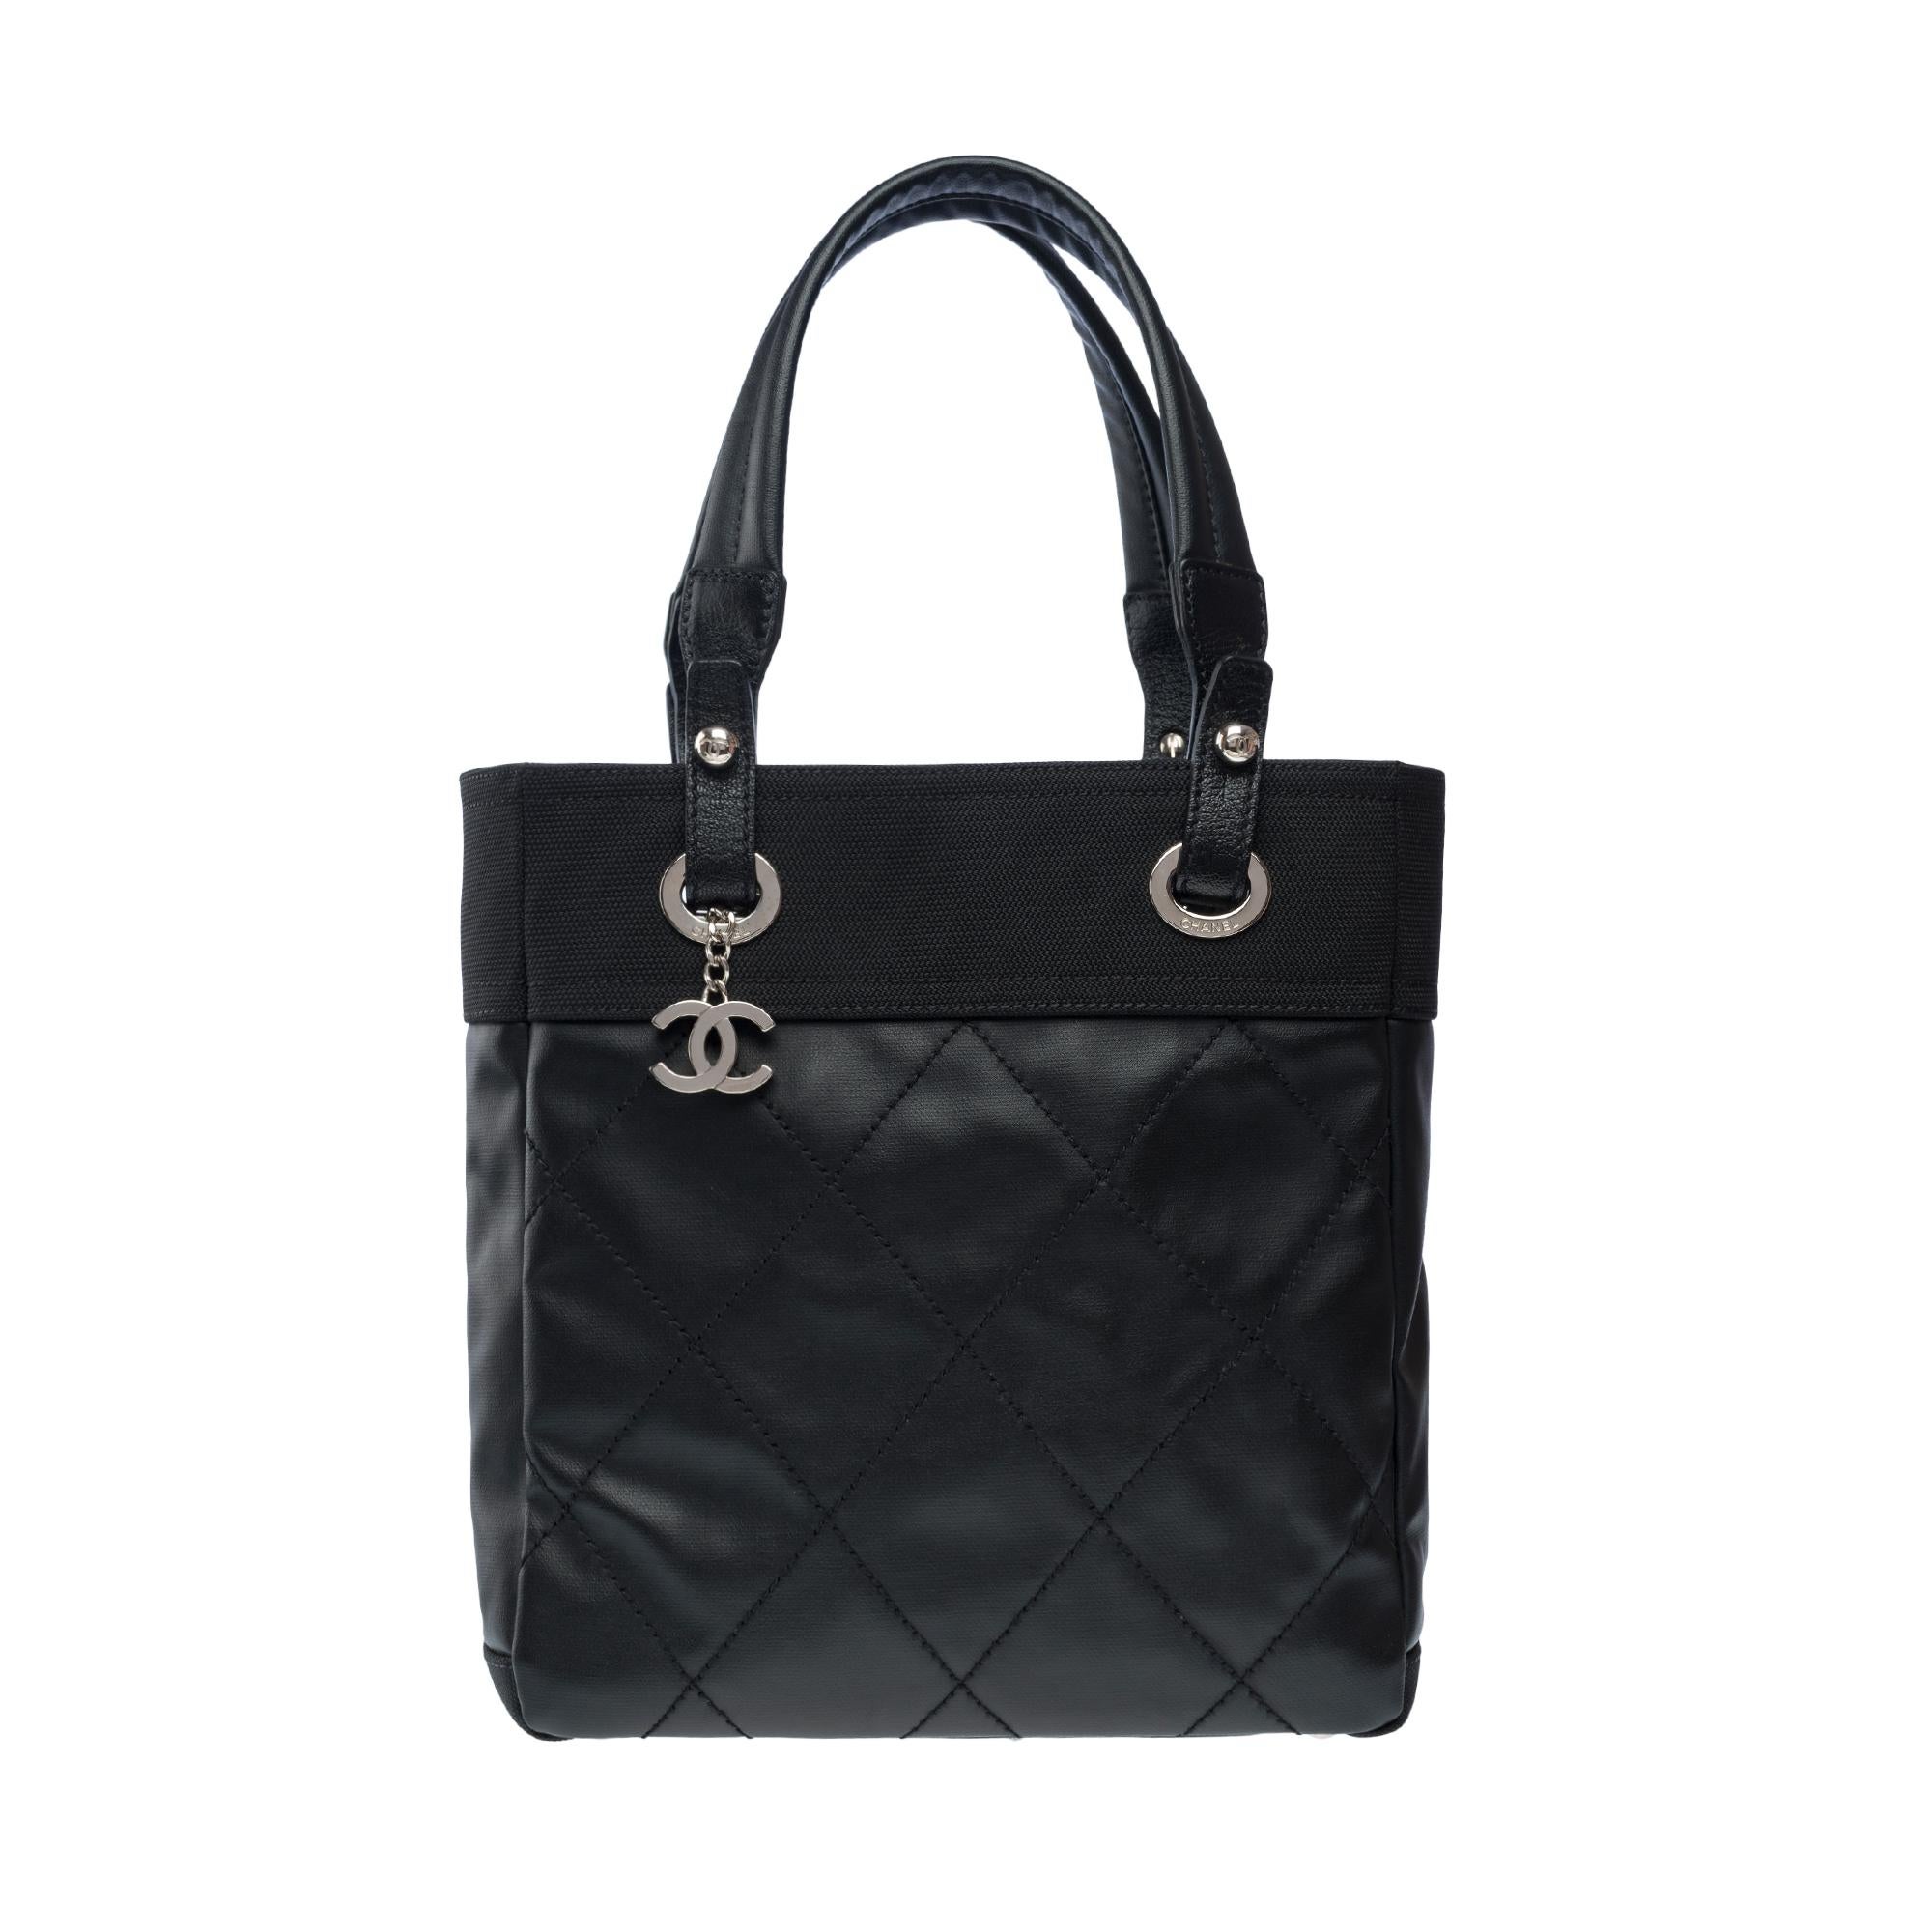 Women's  Chanel Paris-Biarritz Tote bag in black coated canvas , SHW For Sale